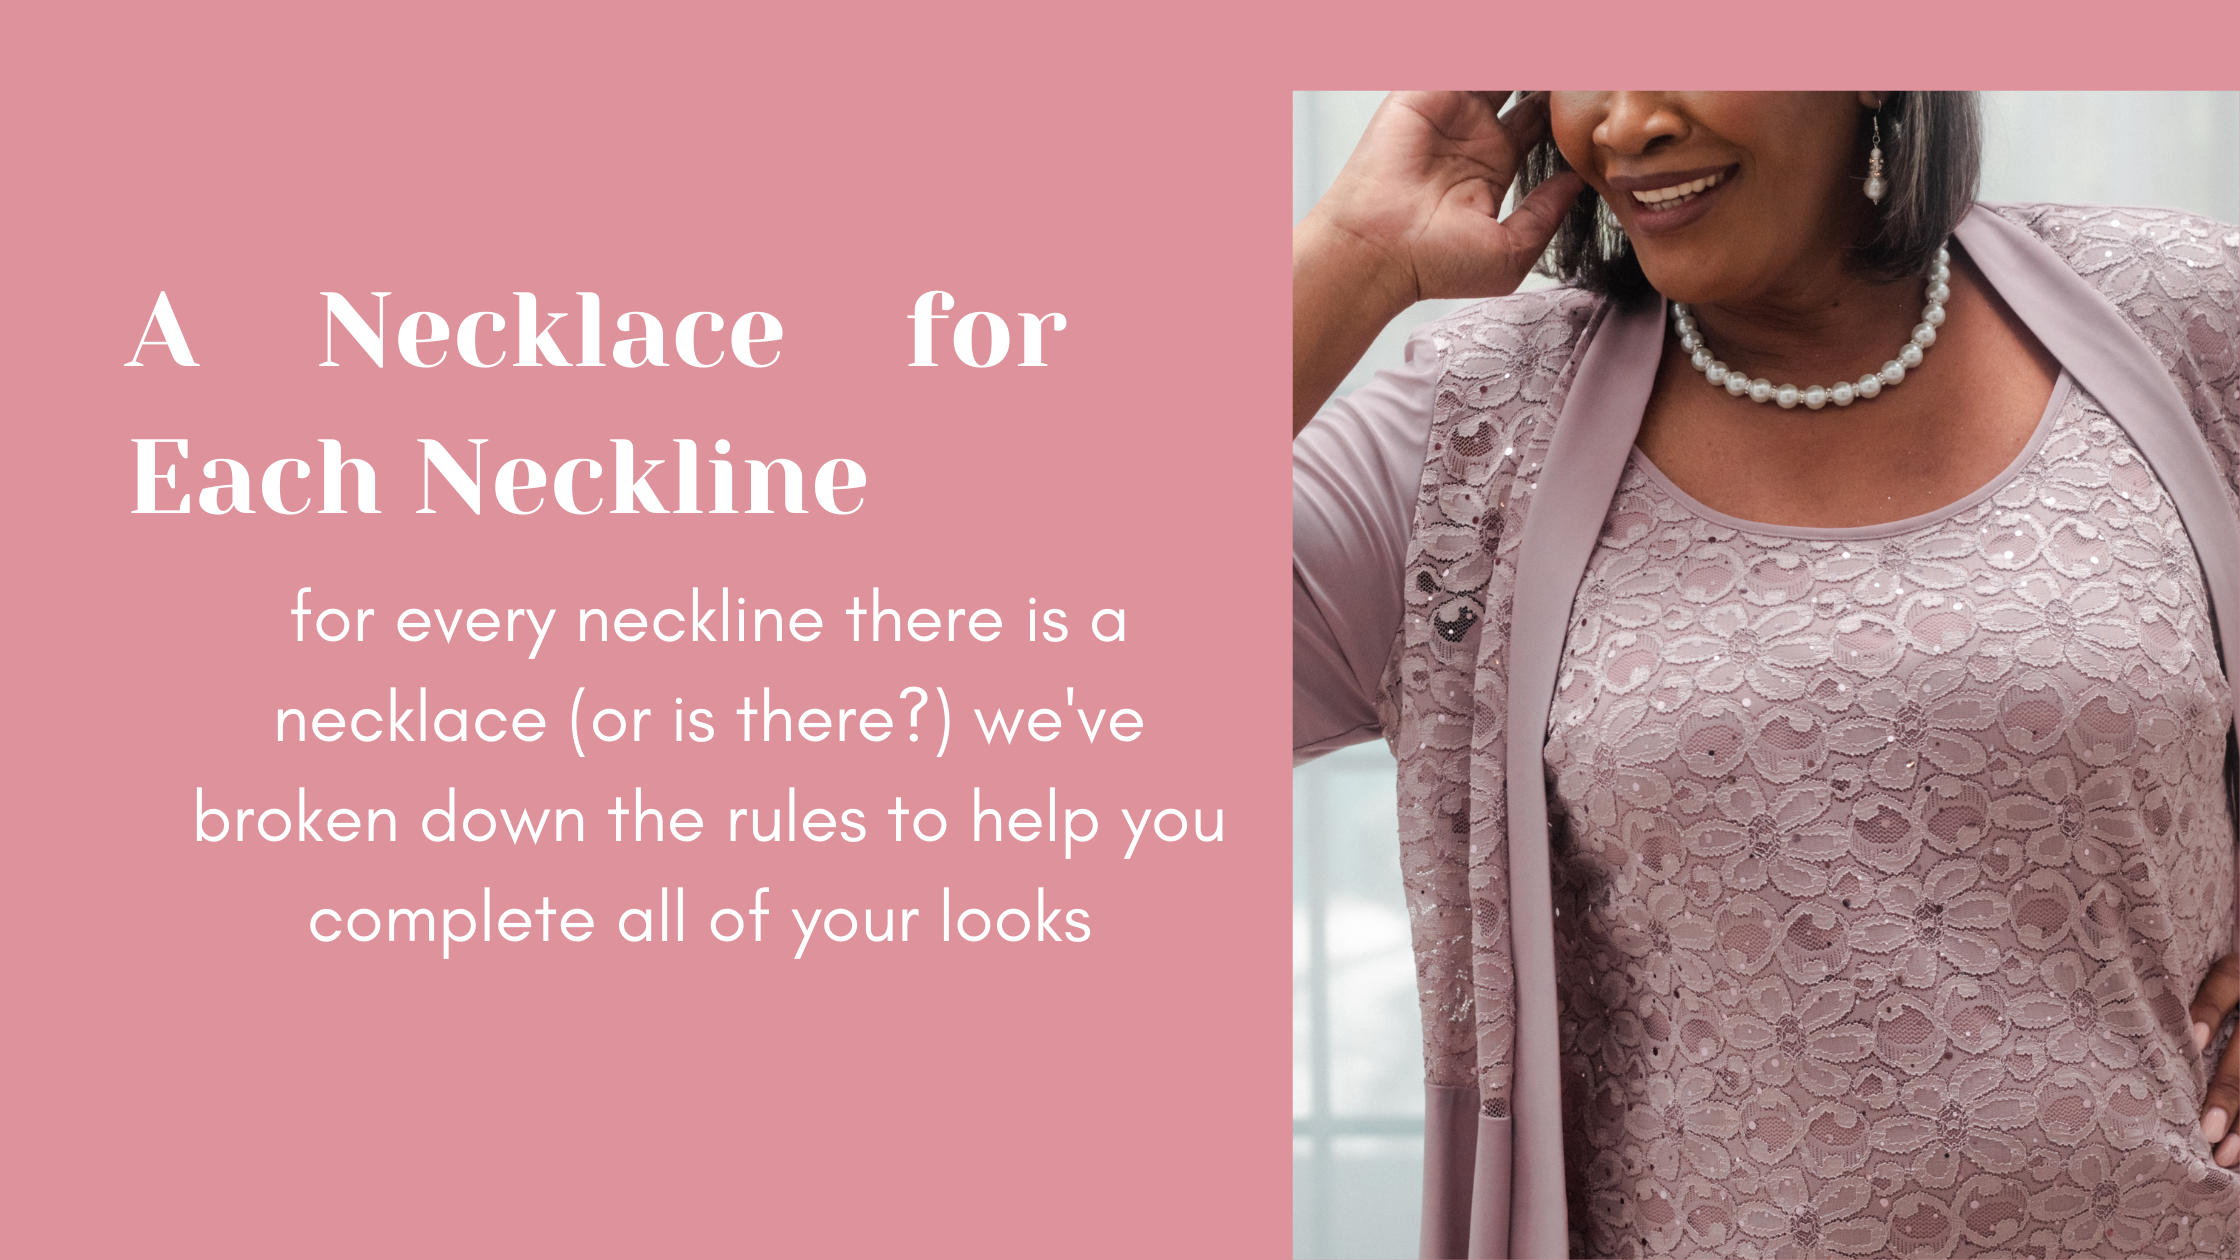 How to Choose Necklaces to Work with Your Neckline | Necklace for neckline, Neckline  necklace guide, Neckline guide